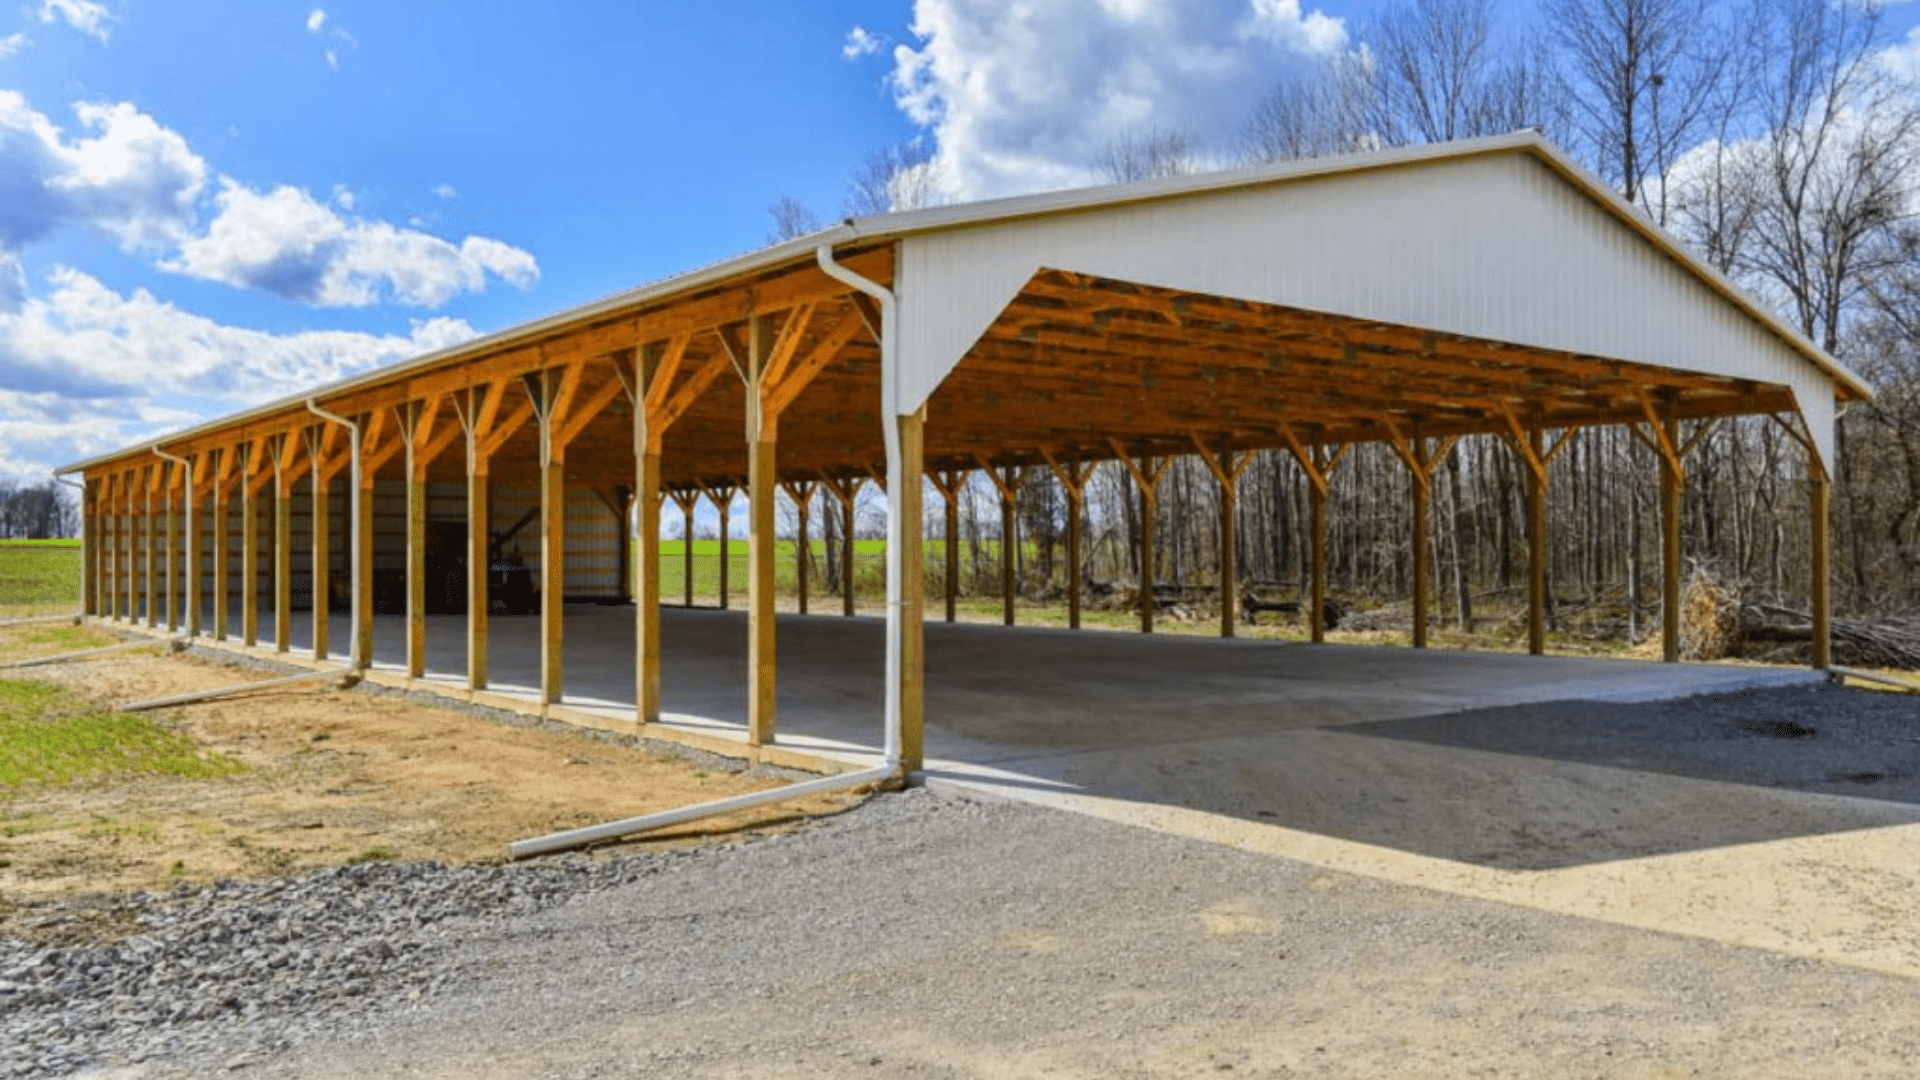  pole barn, steel roof, white aluminum siding, outdoor, backyard, storage, workshop, durable, long-lasting, weather-resistant, classic design.